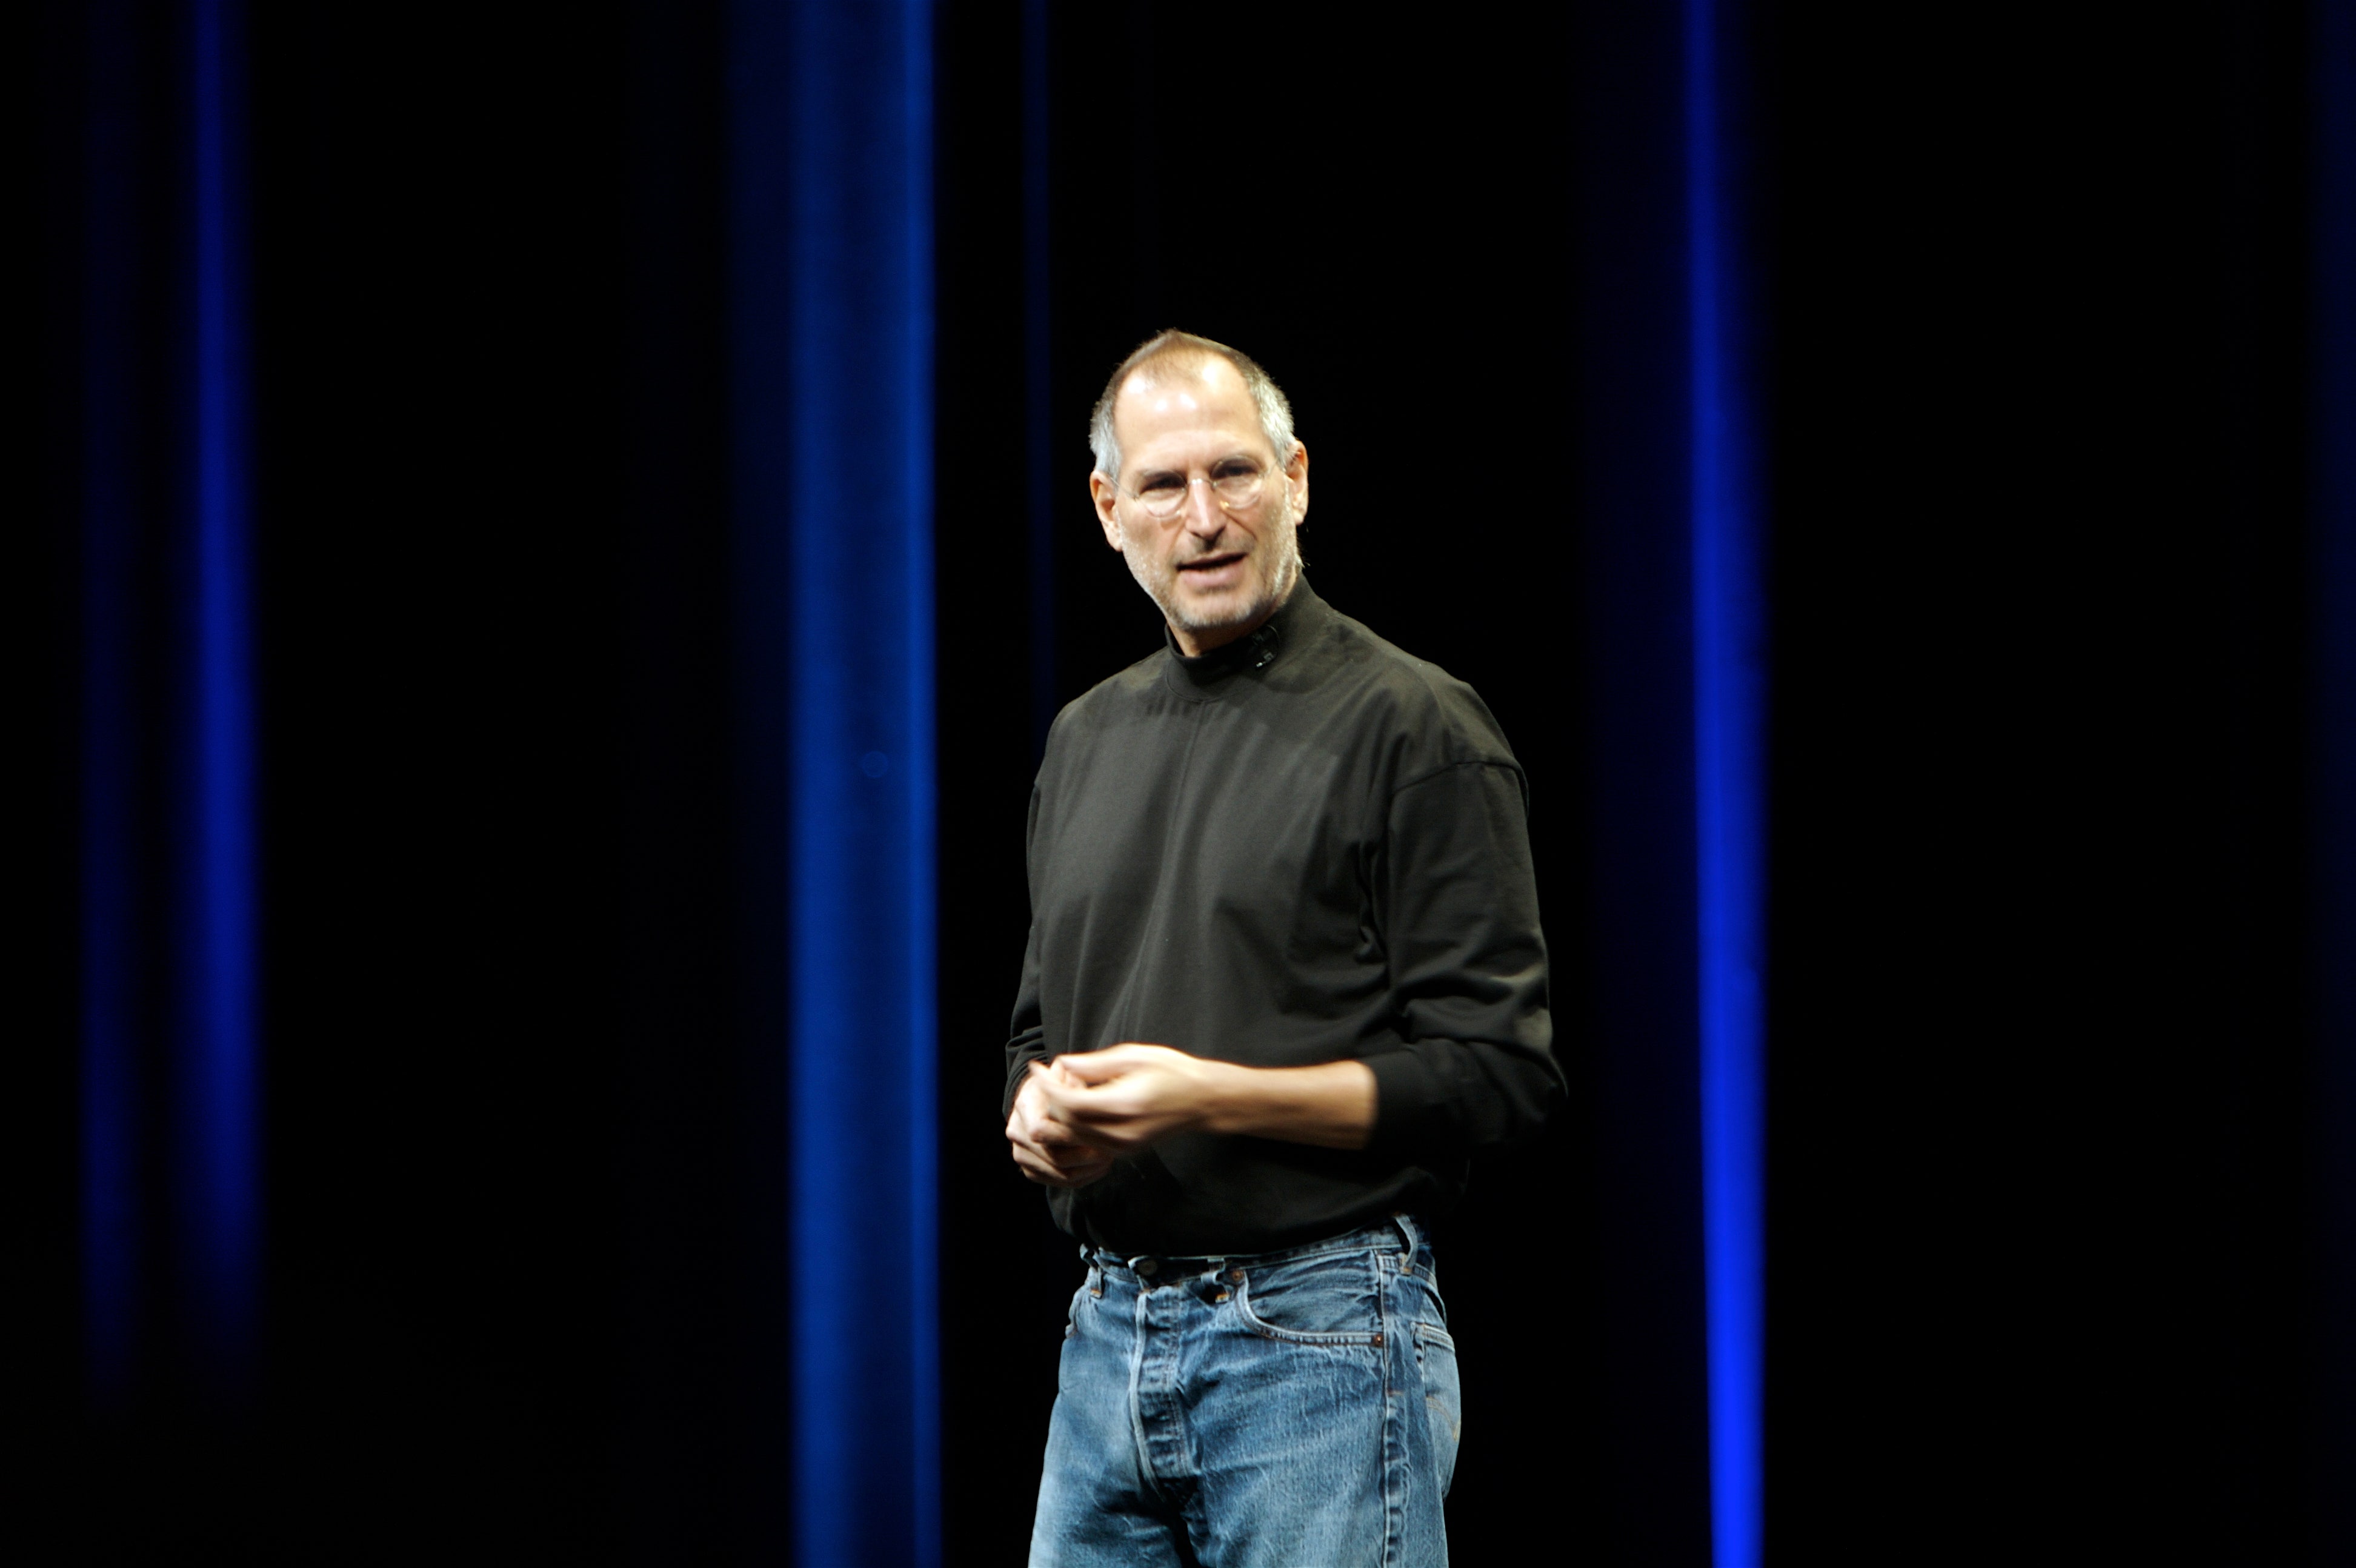 Steve Jobs Would Not Be On Twitter, Says Apple Co-Founder's Wife